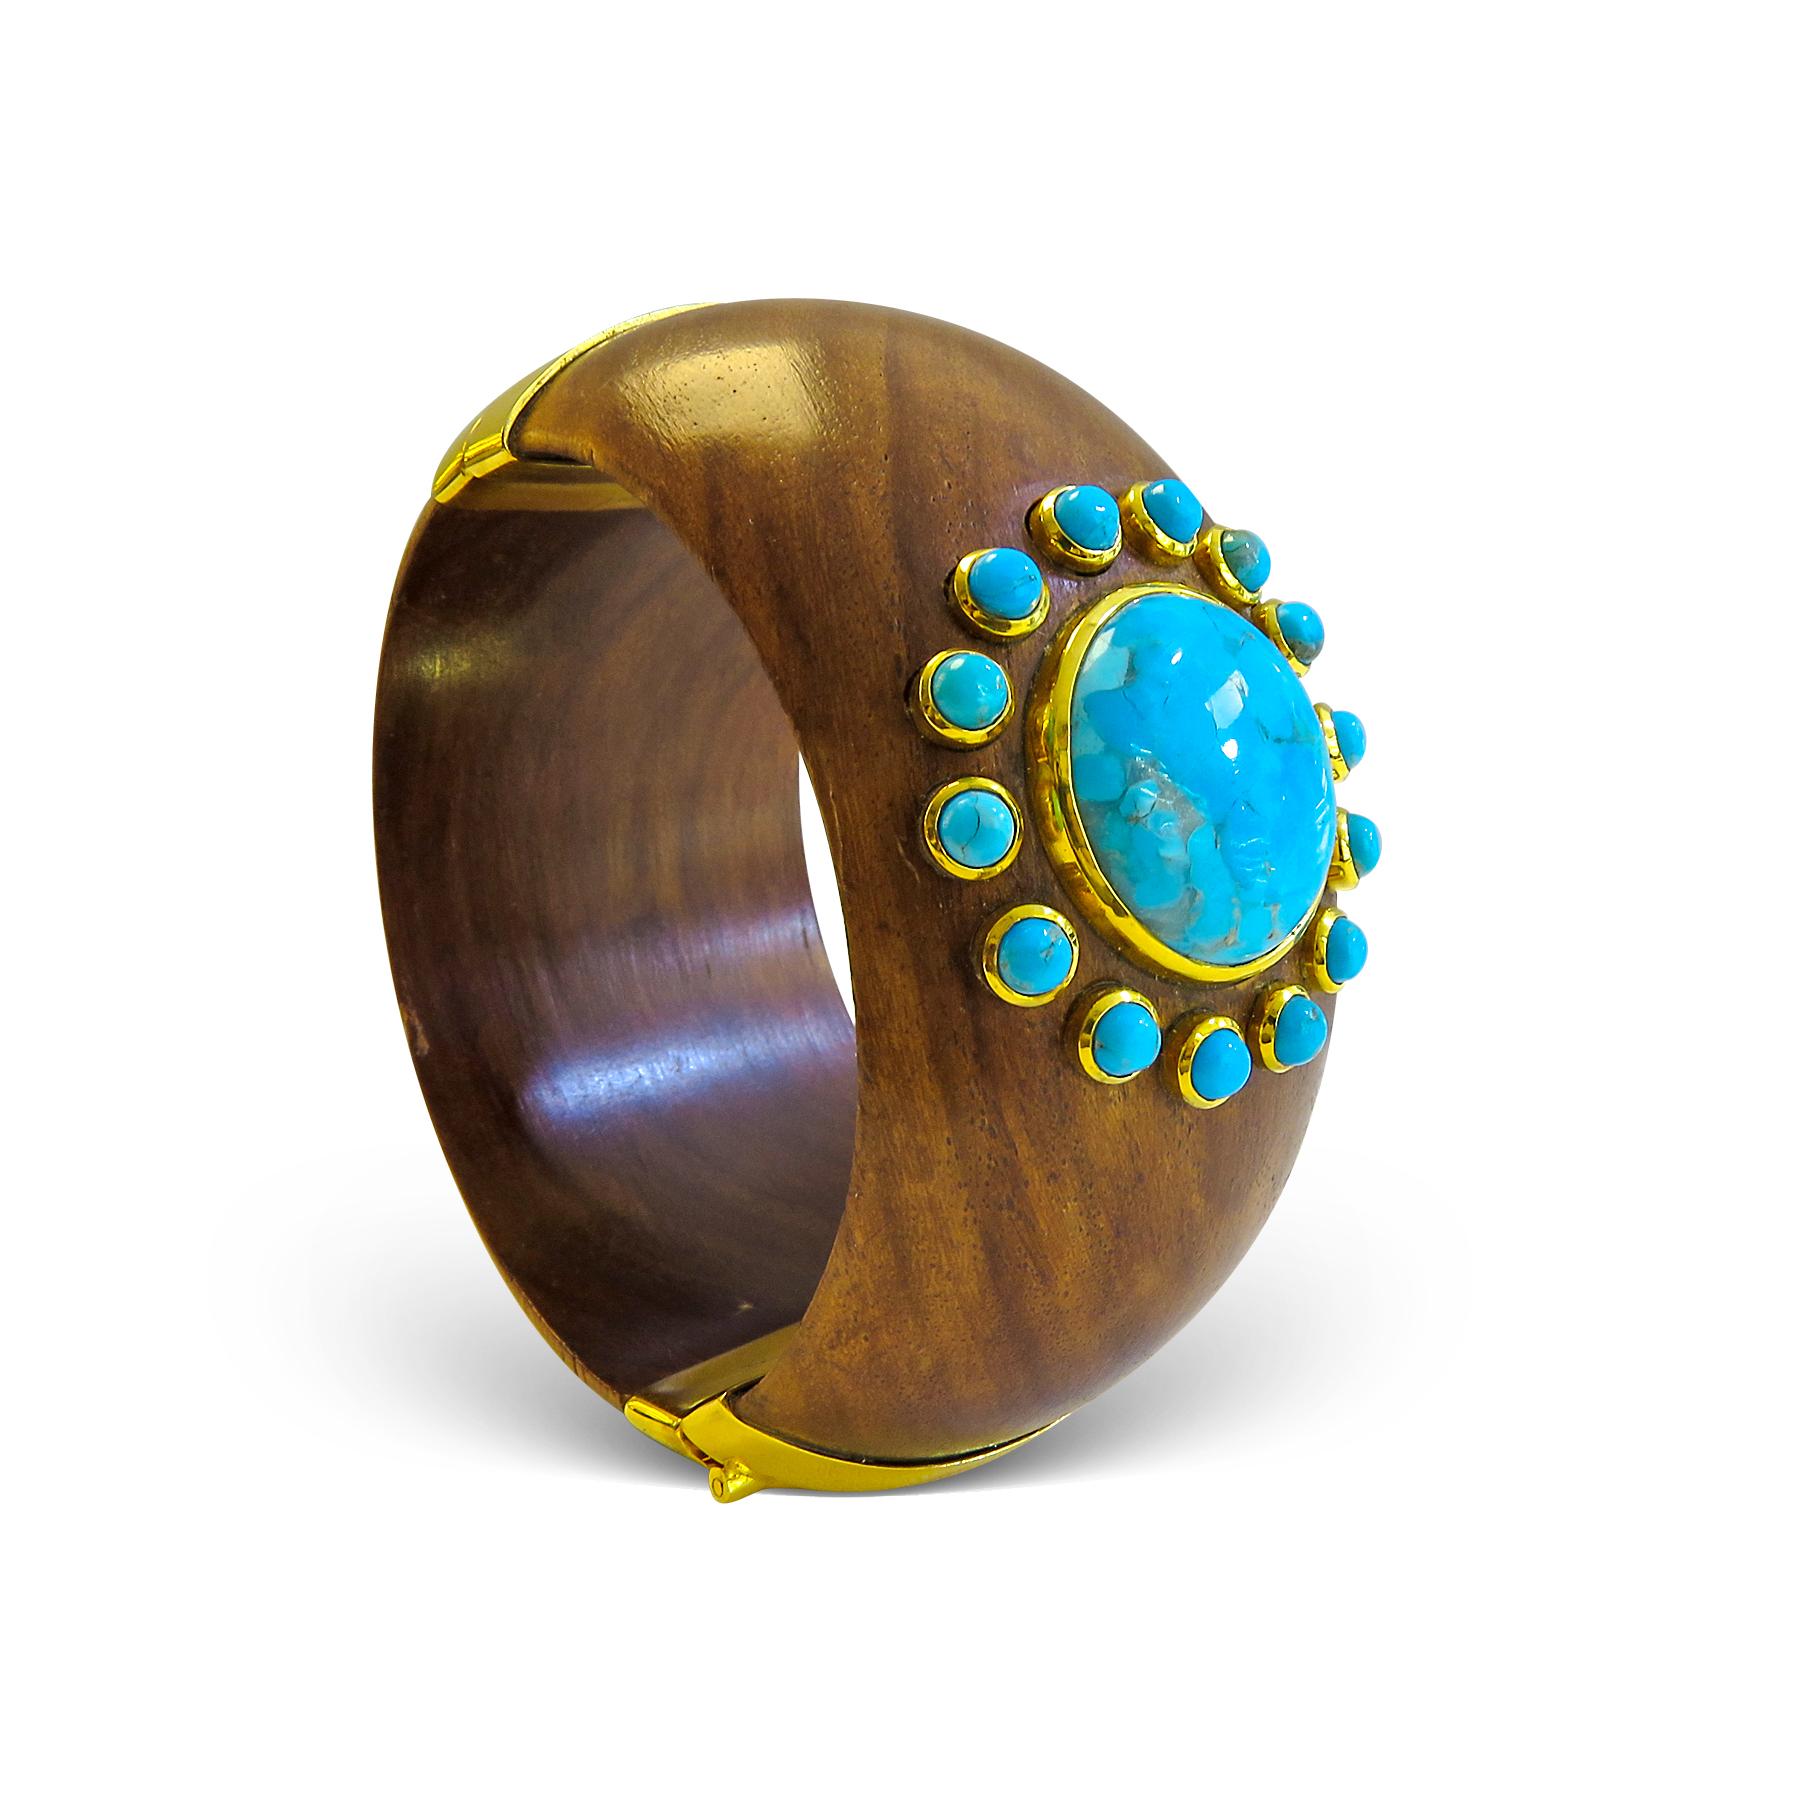 Bangle= Wood 18k gold on st. Silver.
Turquoise= Center 23mm/ Small ones 4mm
Hinged & Lock sistem 
Width= 1 1/2 inches 
Diameter= 2 1/2 inches
Size= 7  